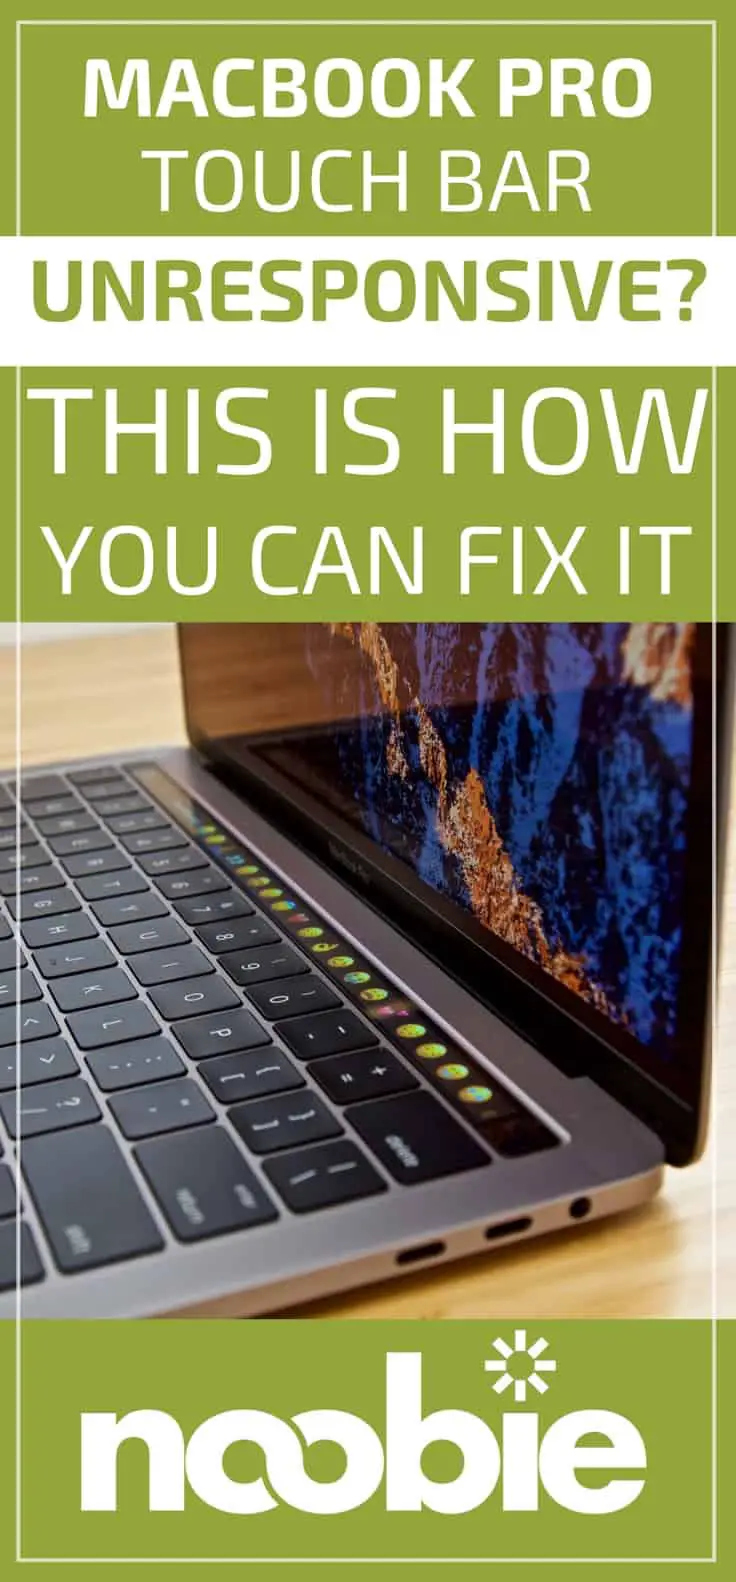 MacBook Pro Touch Bar Unresponsive? This Is How You Can Fix It | MacBook Pro Touch Bar Not Working | https://noobie.com/macbook-pro-touch-bar/